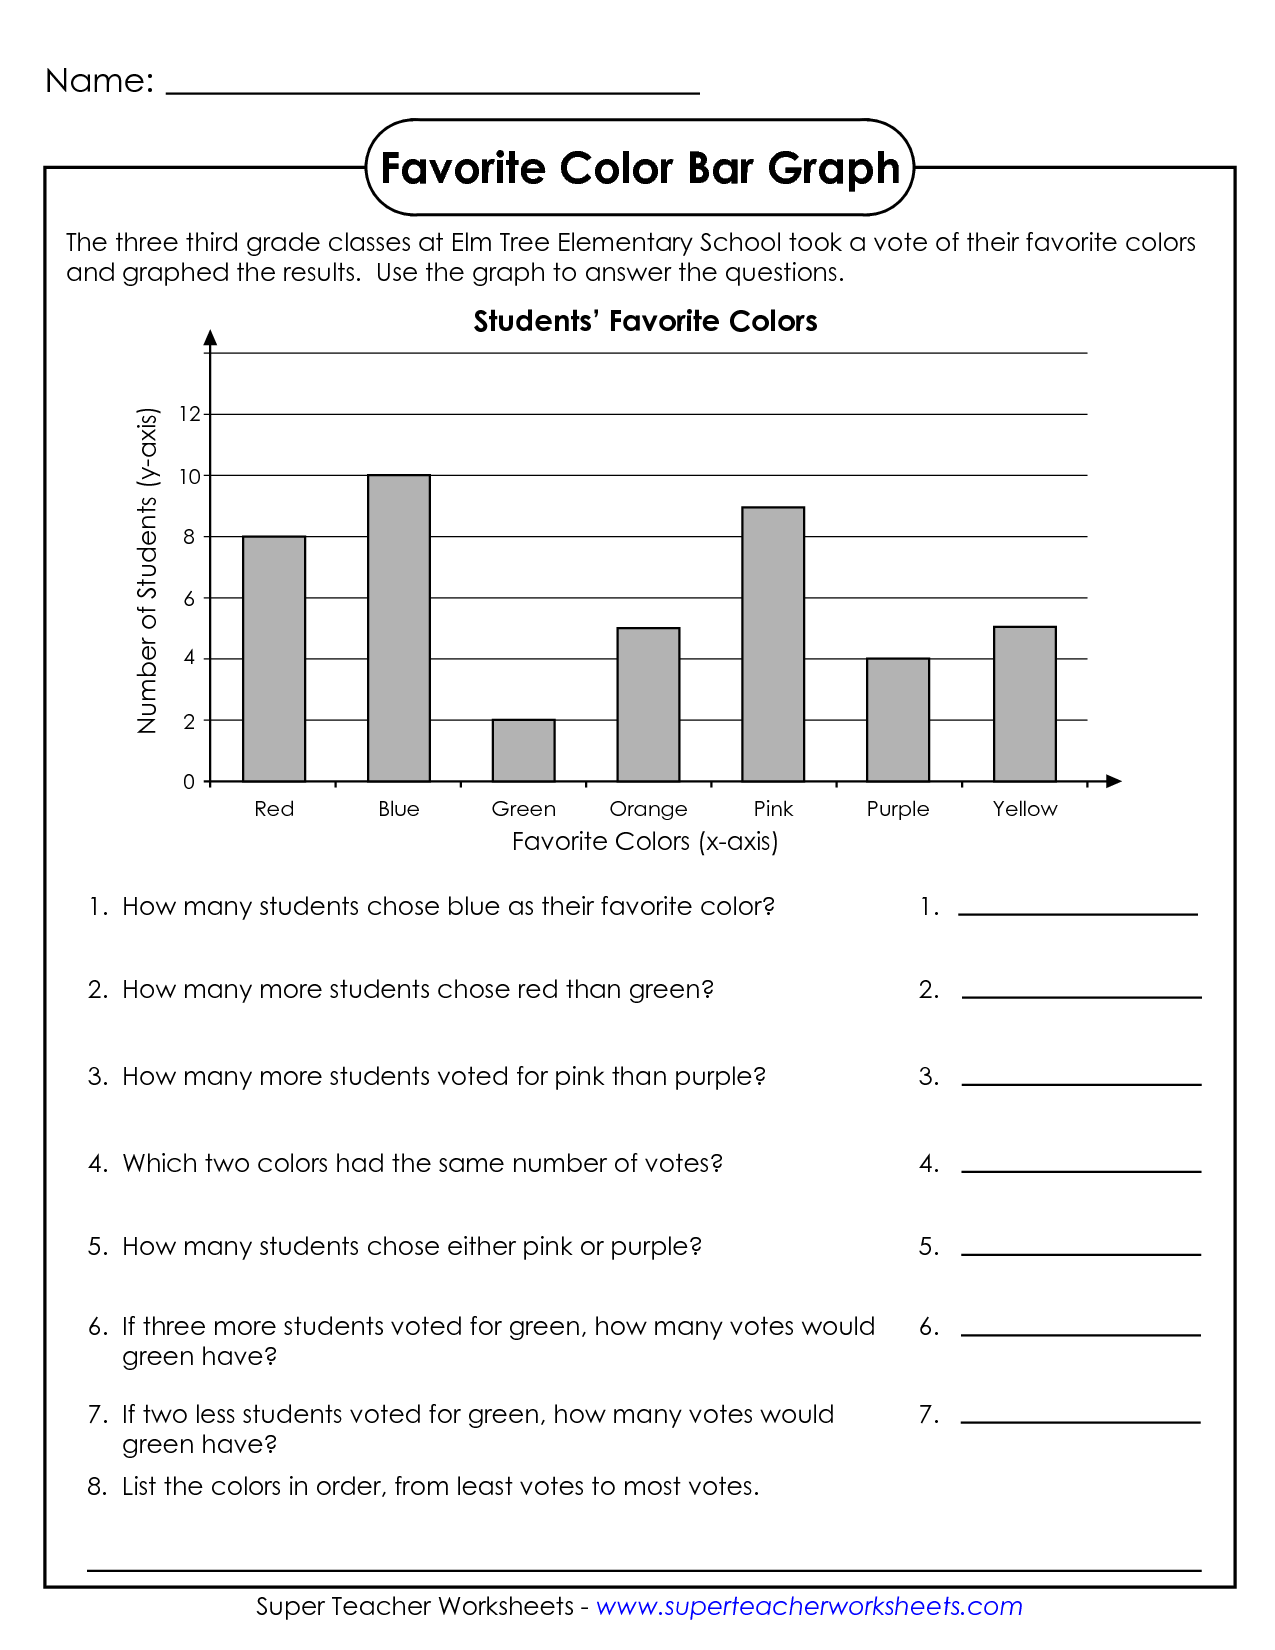 9 Best Images of Super Teacher Worksheets Graphing - Bar Graph